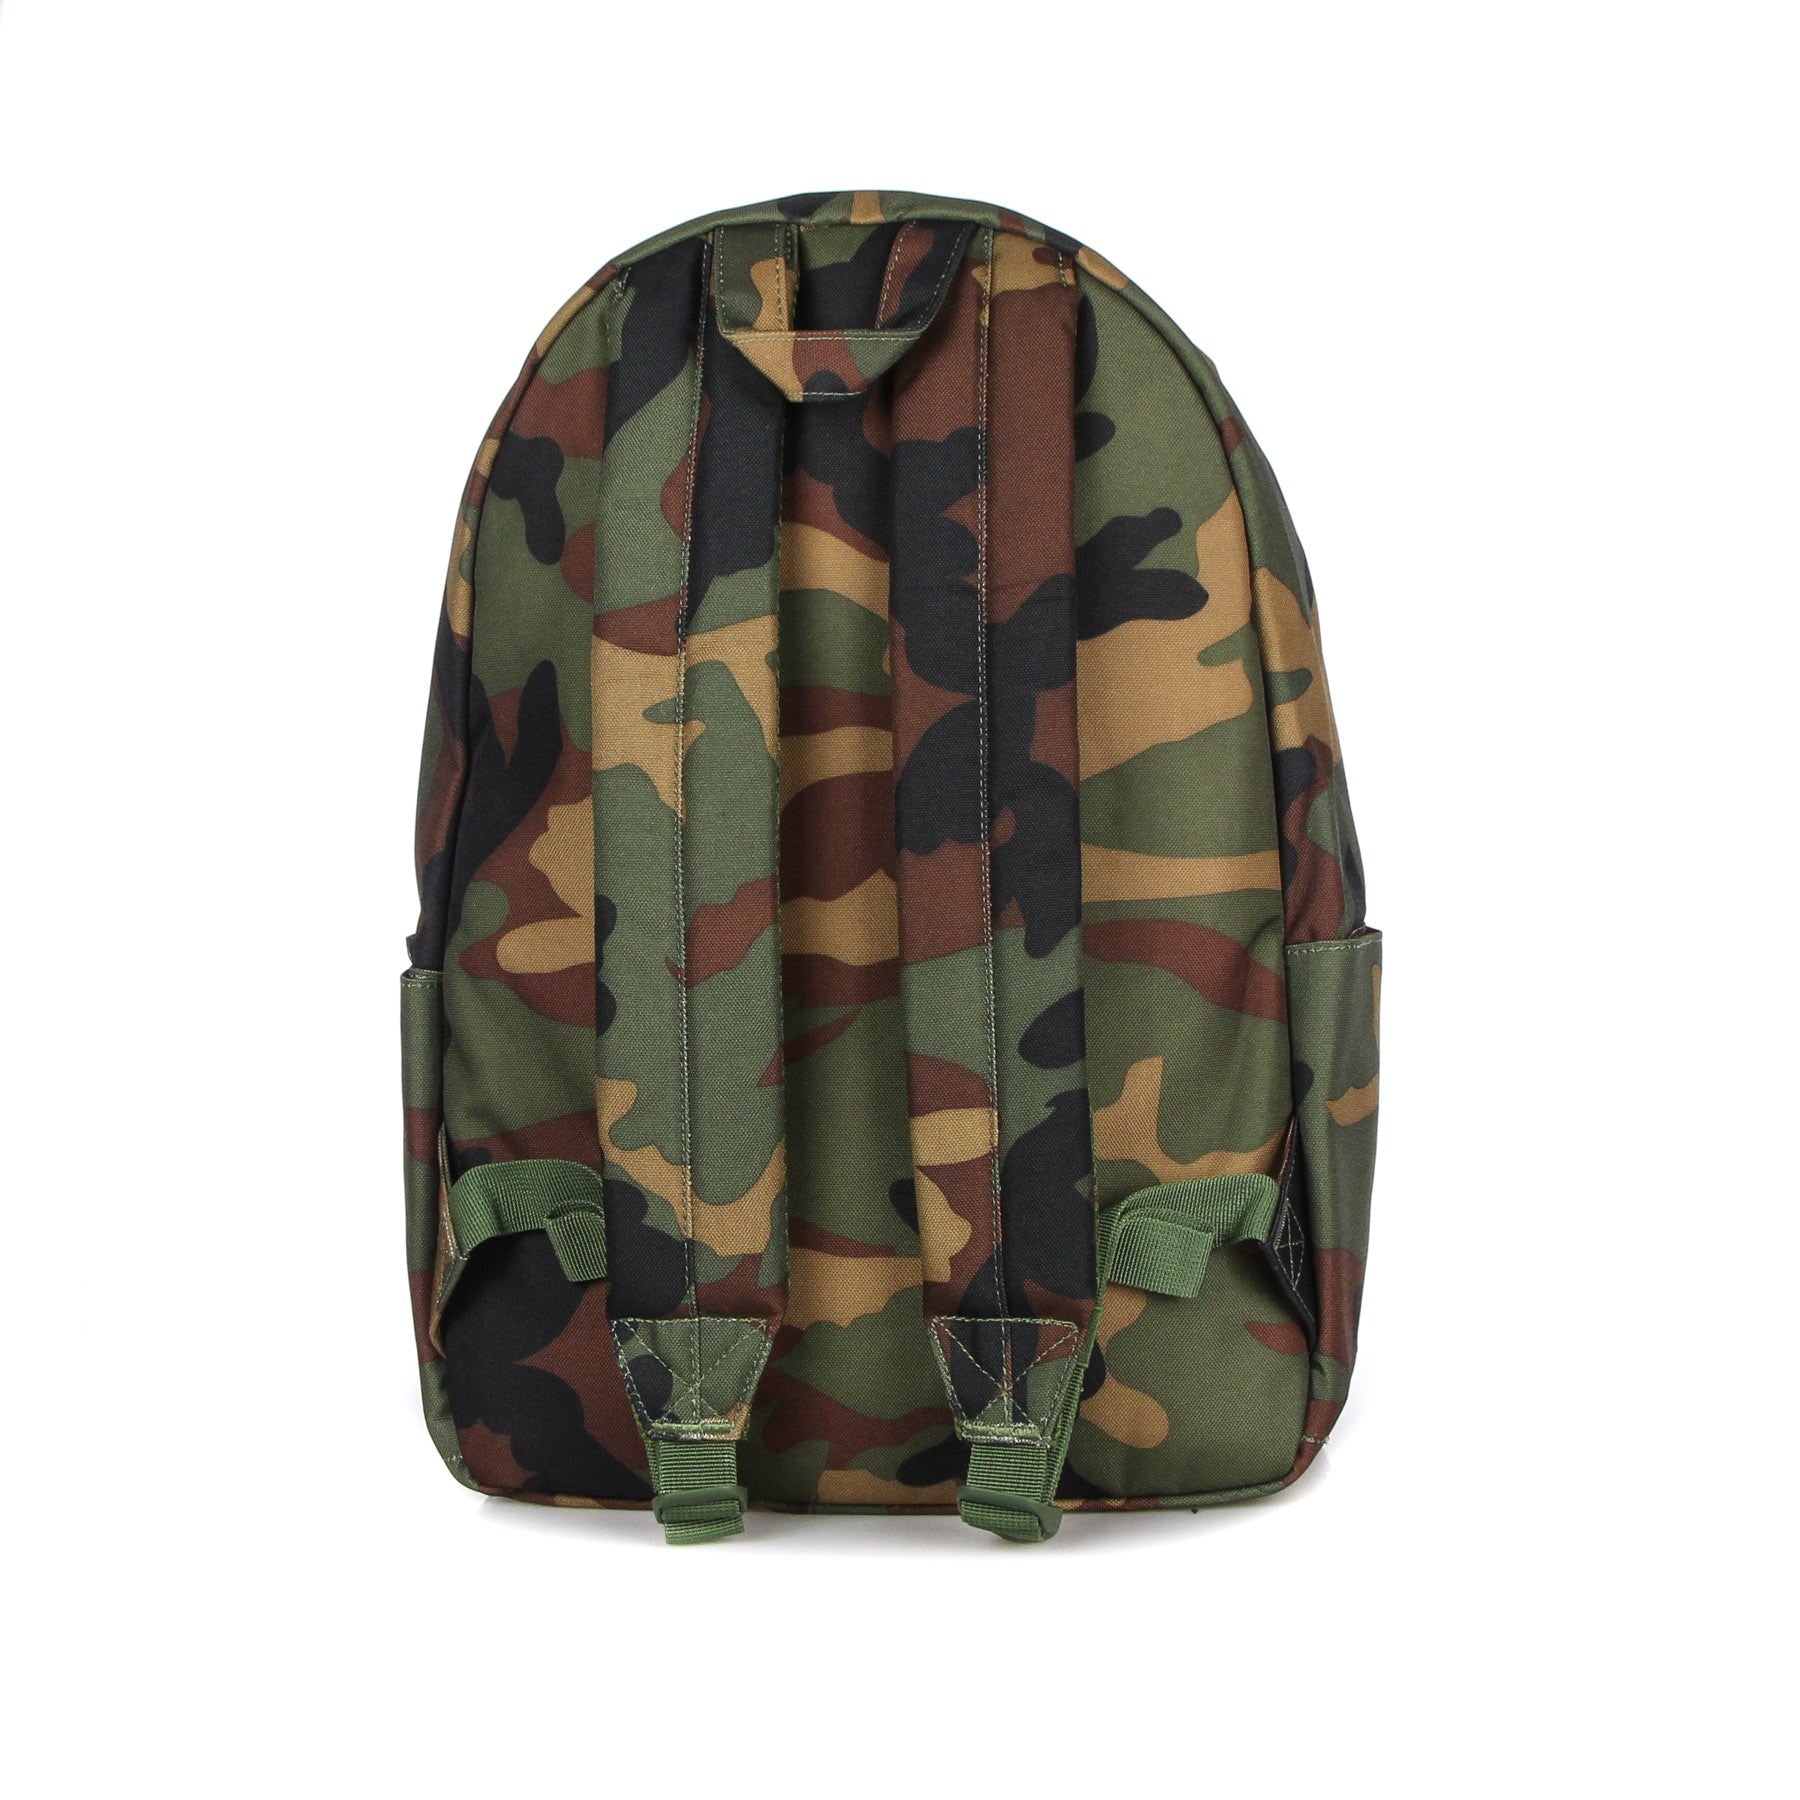 Classic Men's Backpack X-large Woodland Camo